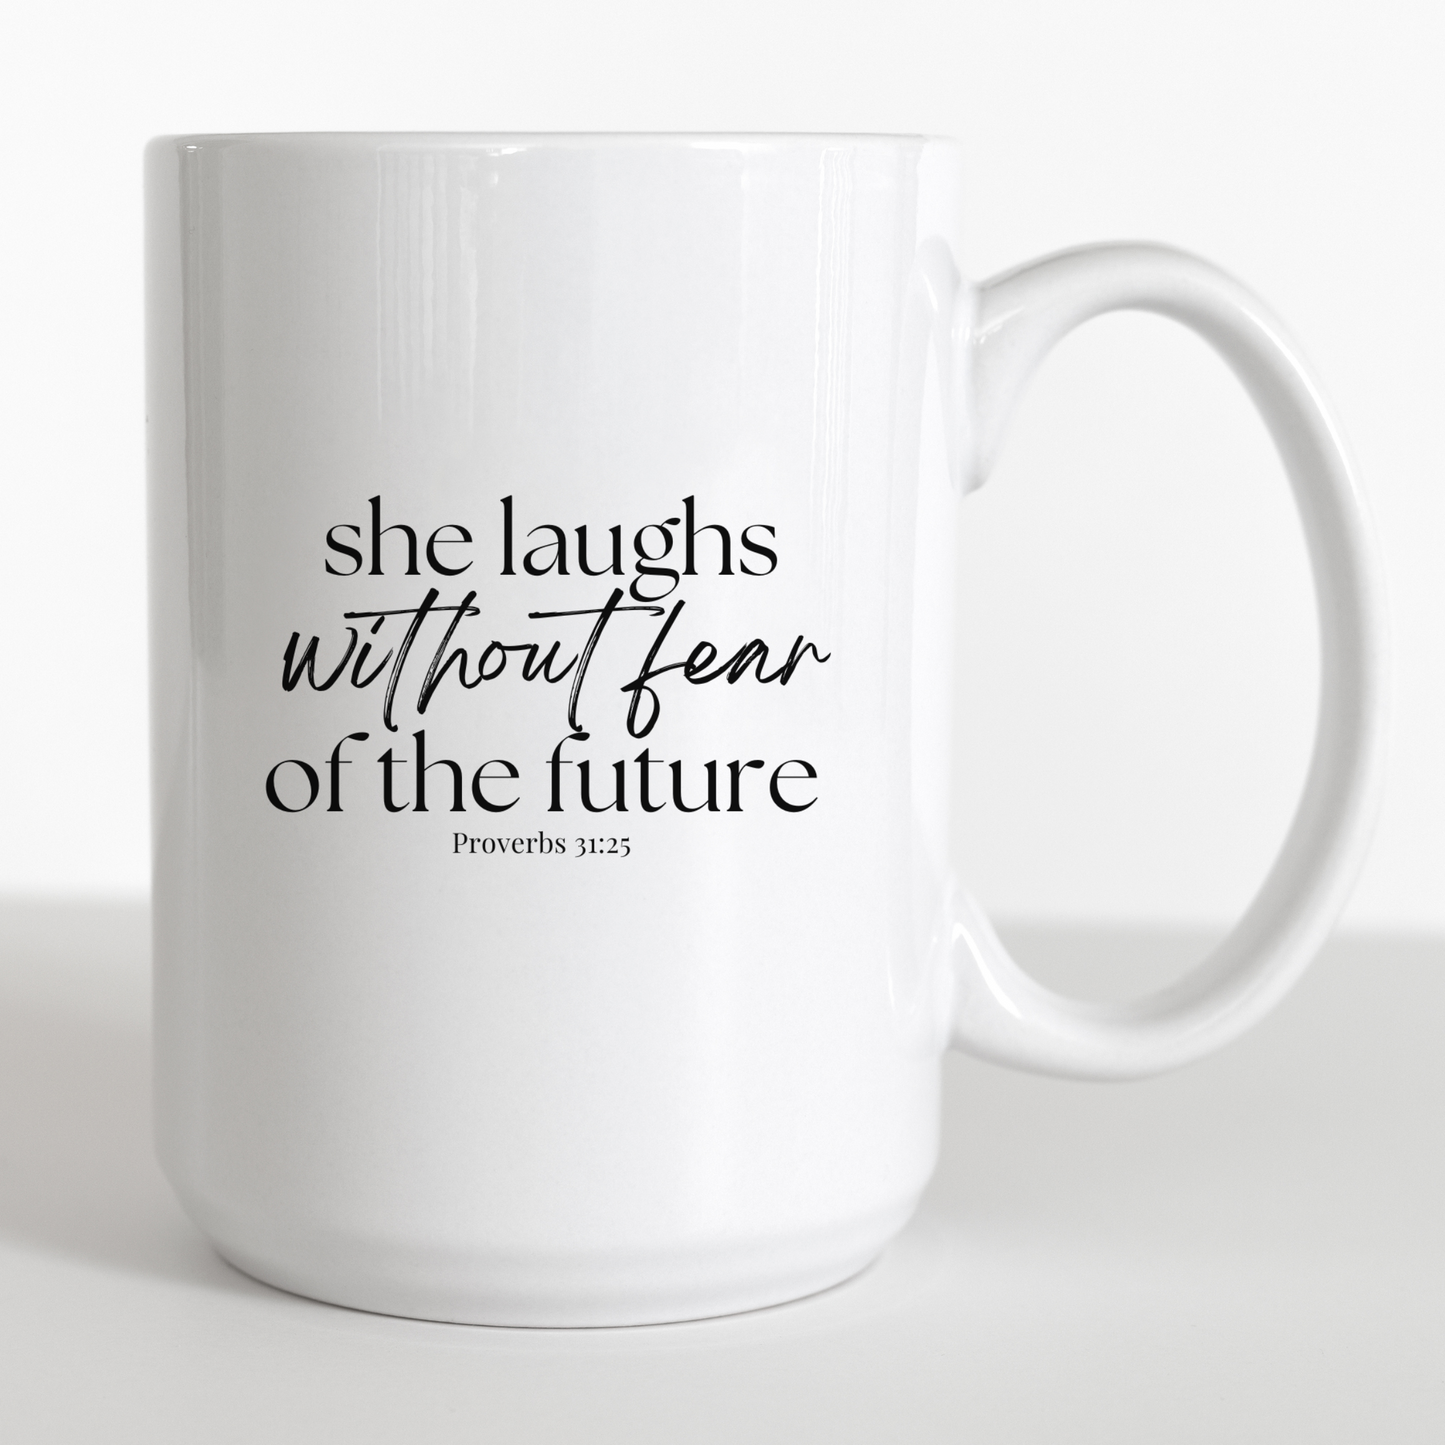 She Laughs Without Fear of the Future - 15 oz mug